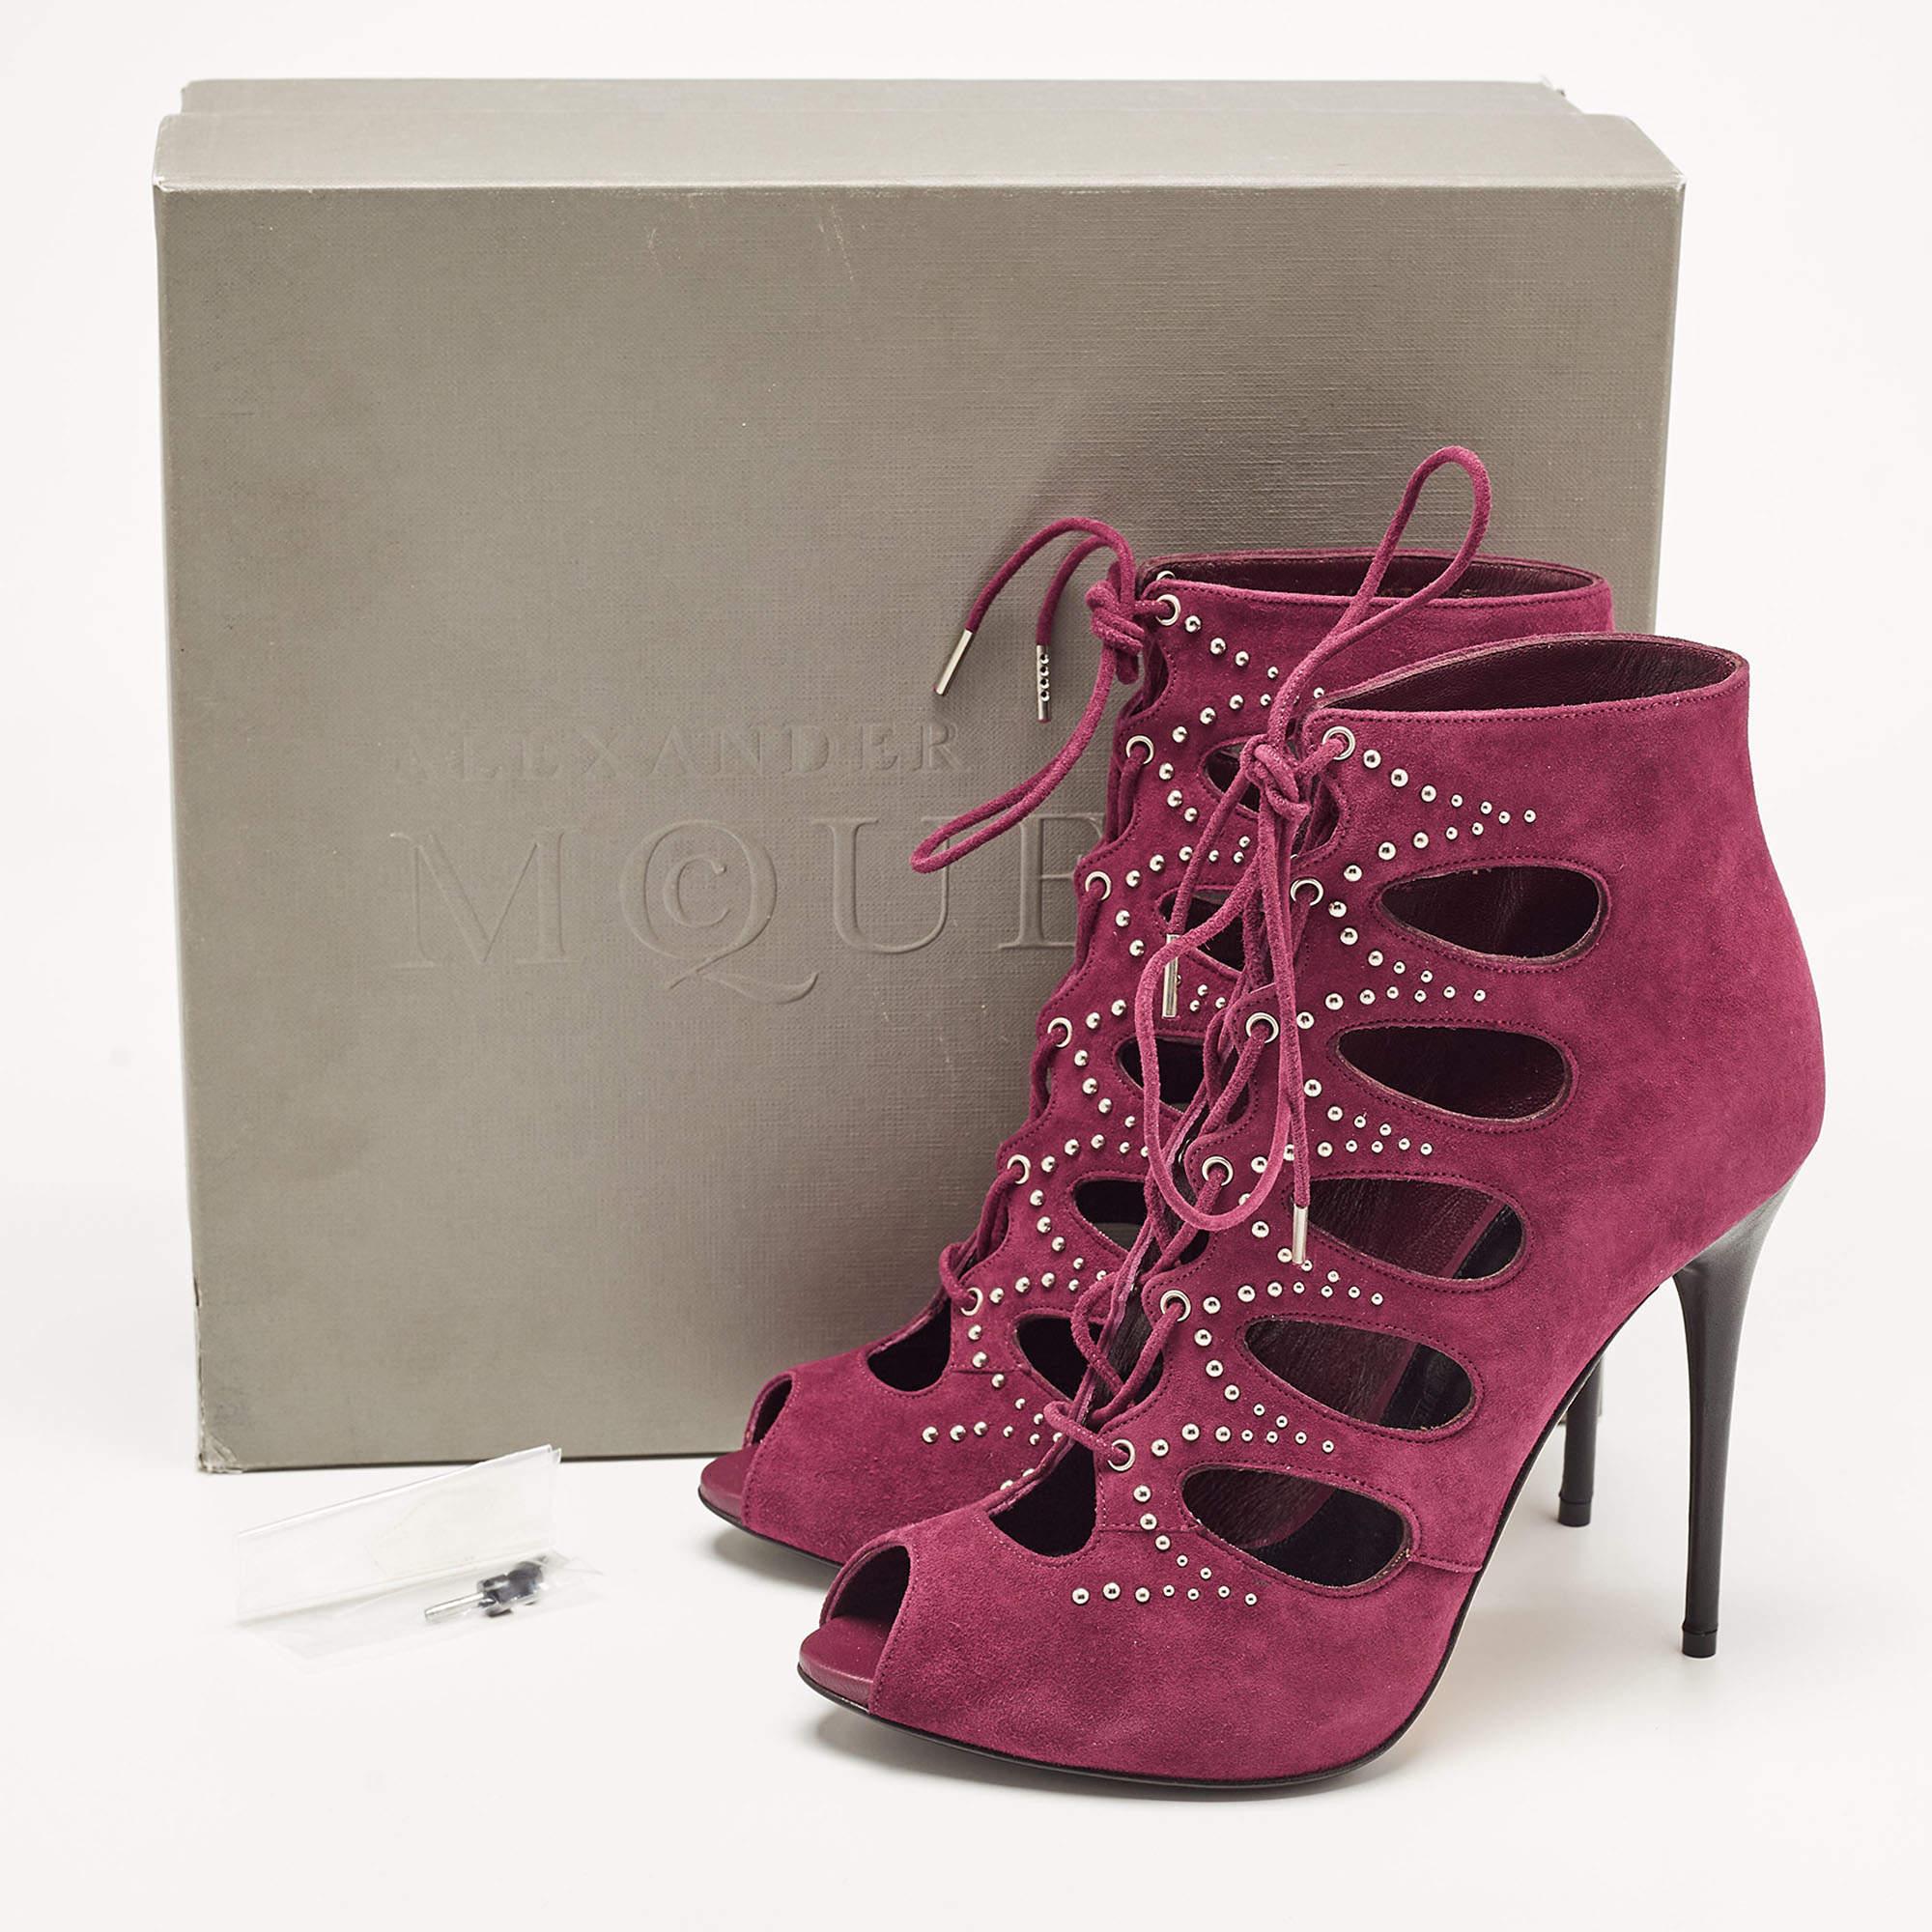 Alexander McQueen Burgundy Suede Cut Out Studded Booties Size 37 5